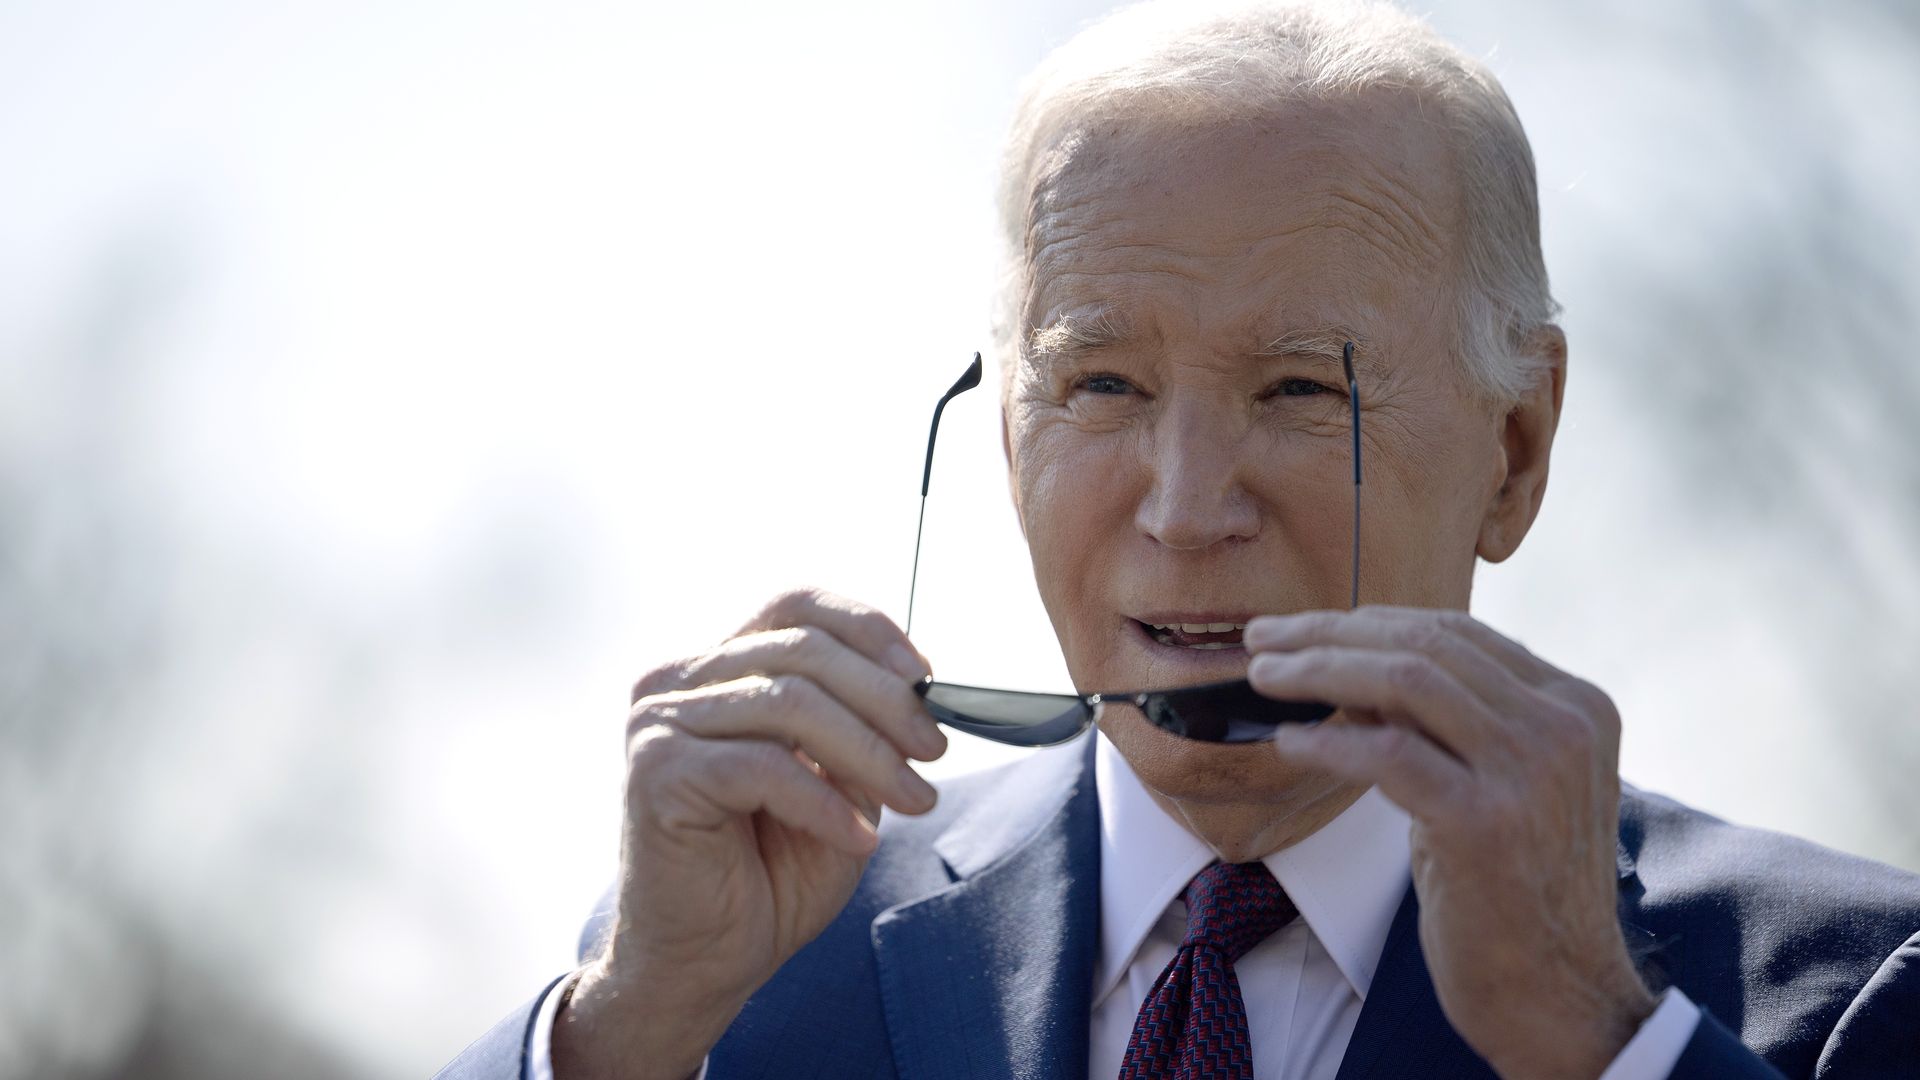 President Joe Biden, wearing a blue suit, white shirt and red and blue tie, puts on aviator sunglasses while outside.